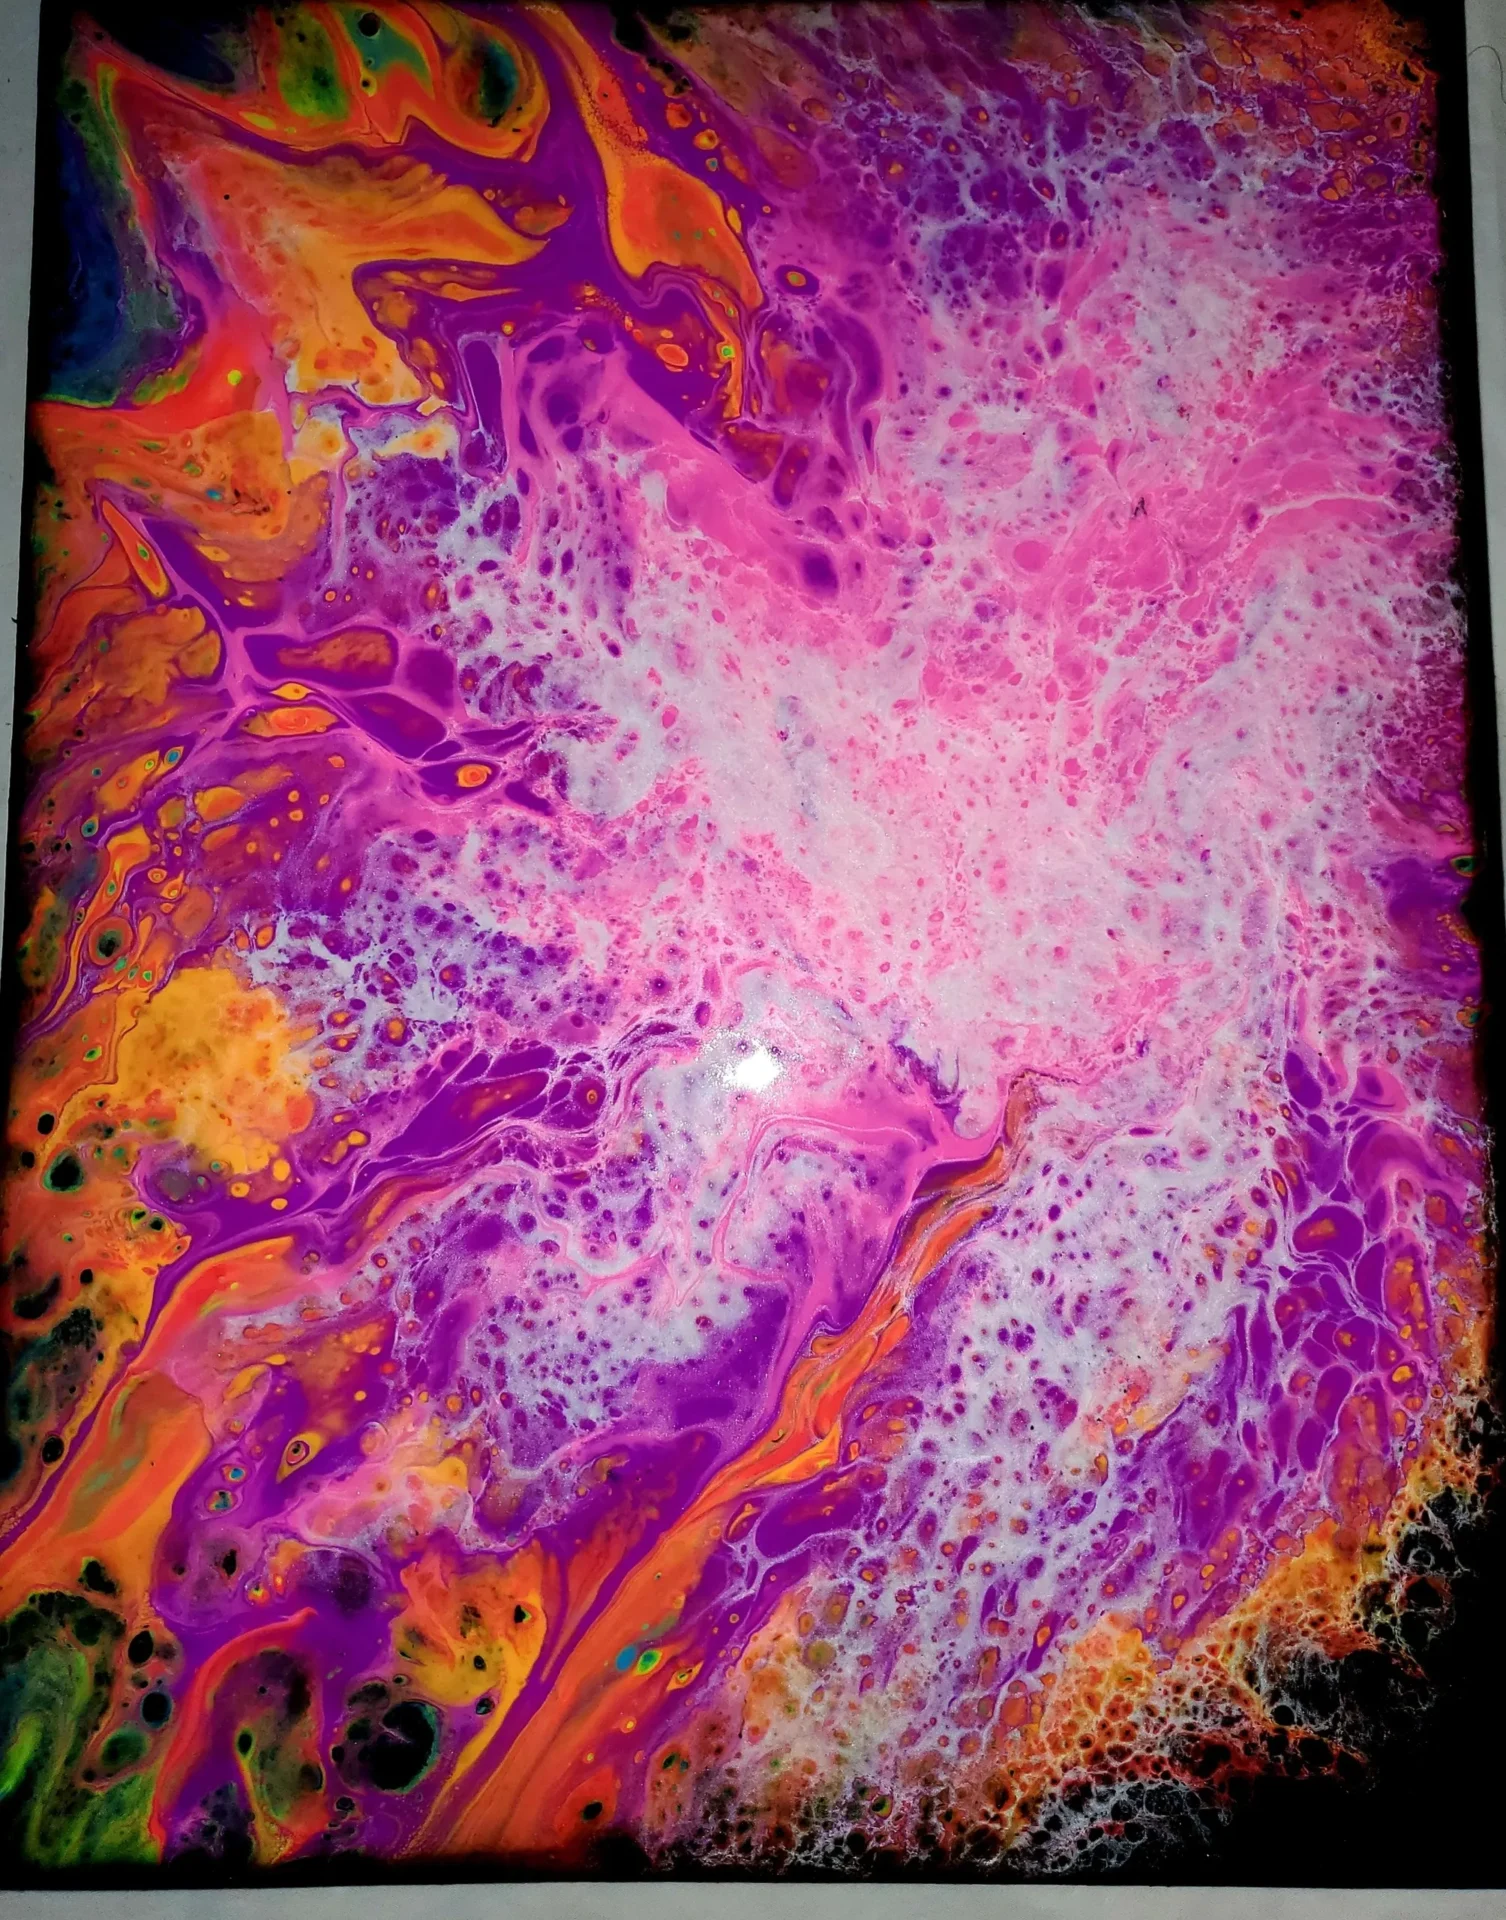 A painting of purple and orange swirls on the ground.